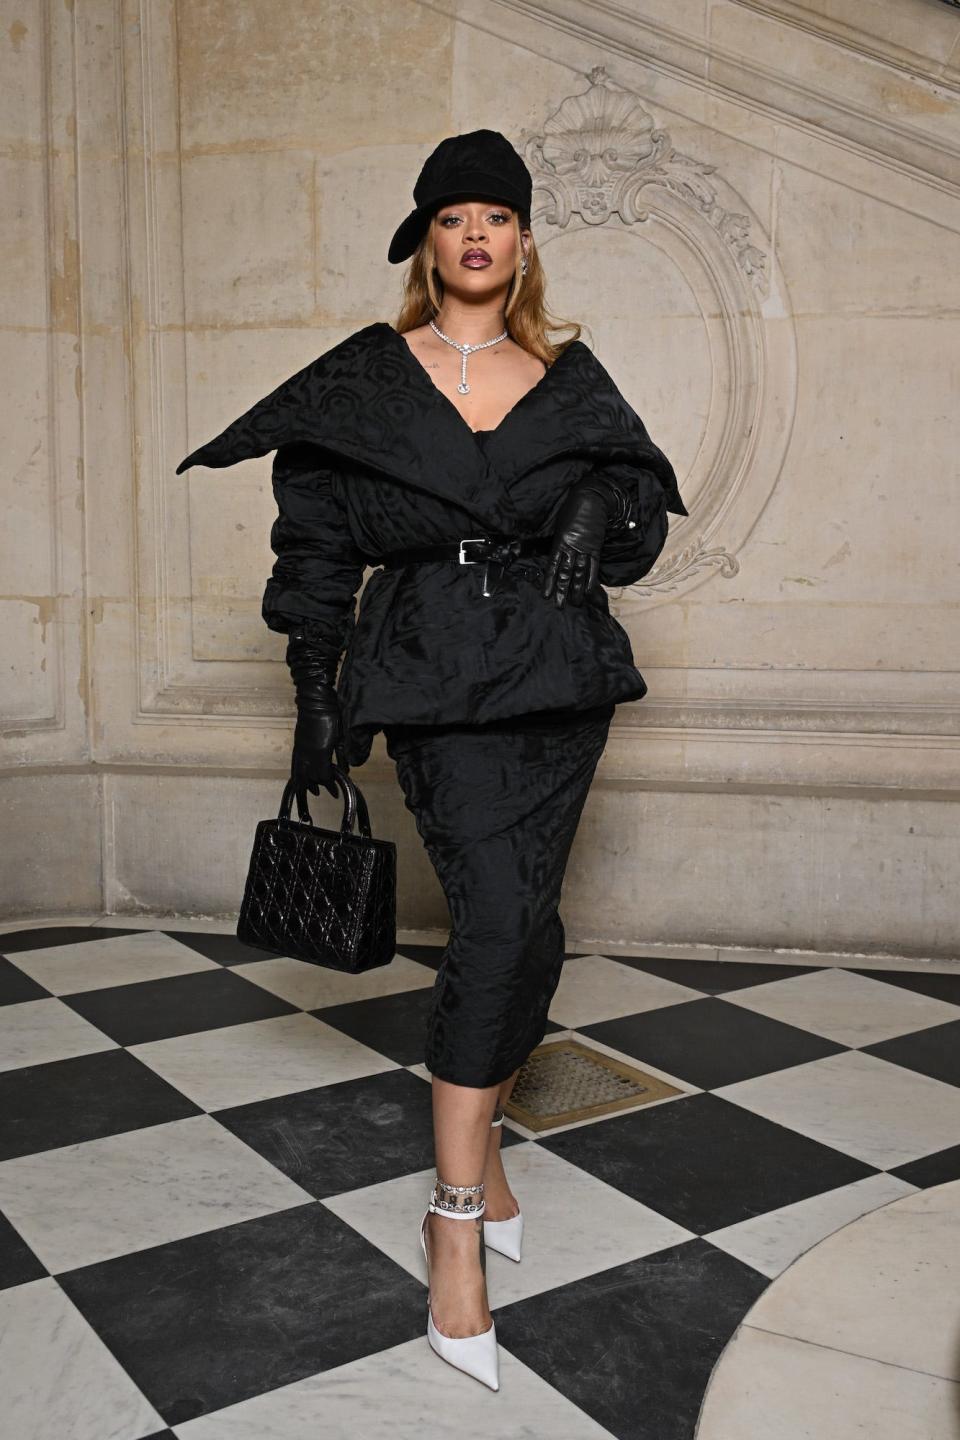 Rihanna attends the Christian Dior Haute Couture show during Paris Fashion Week 2024.